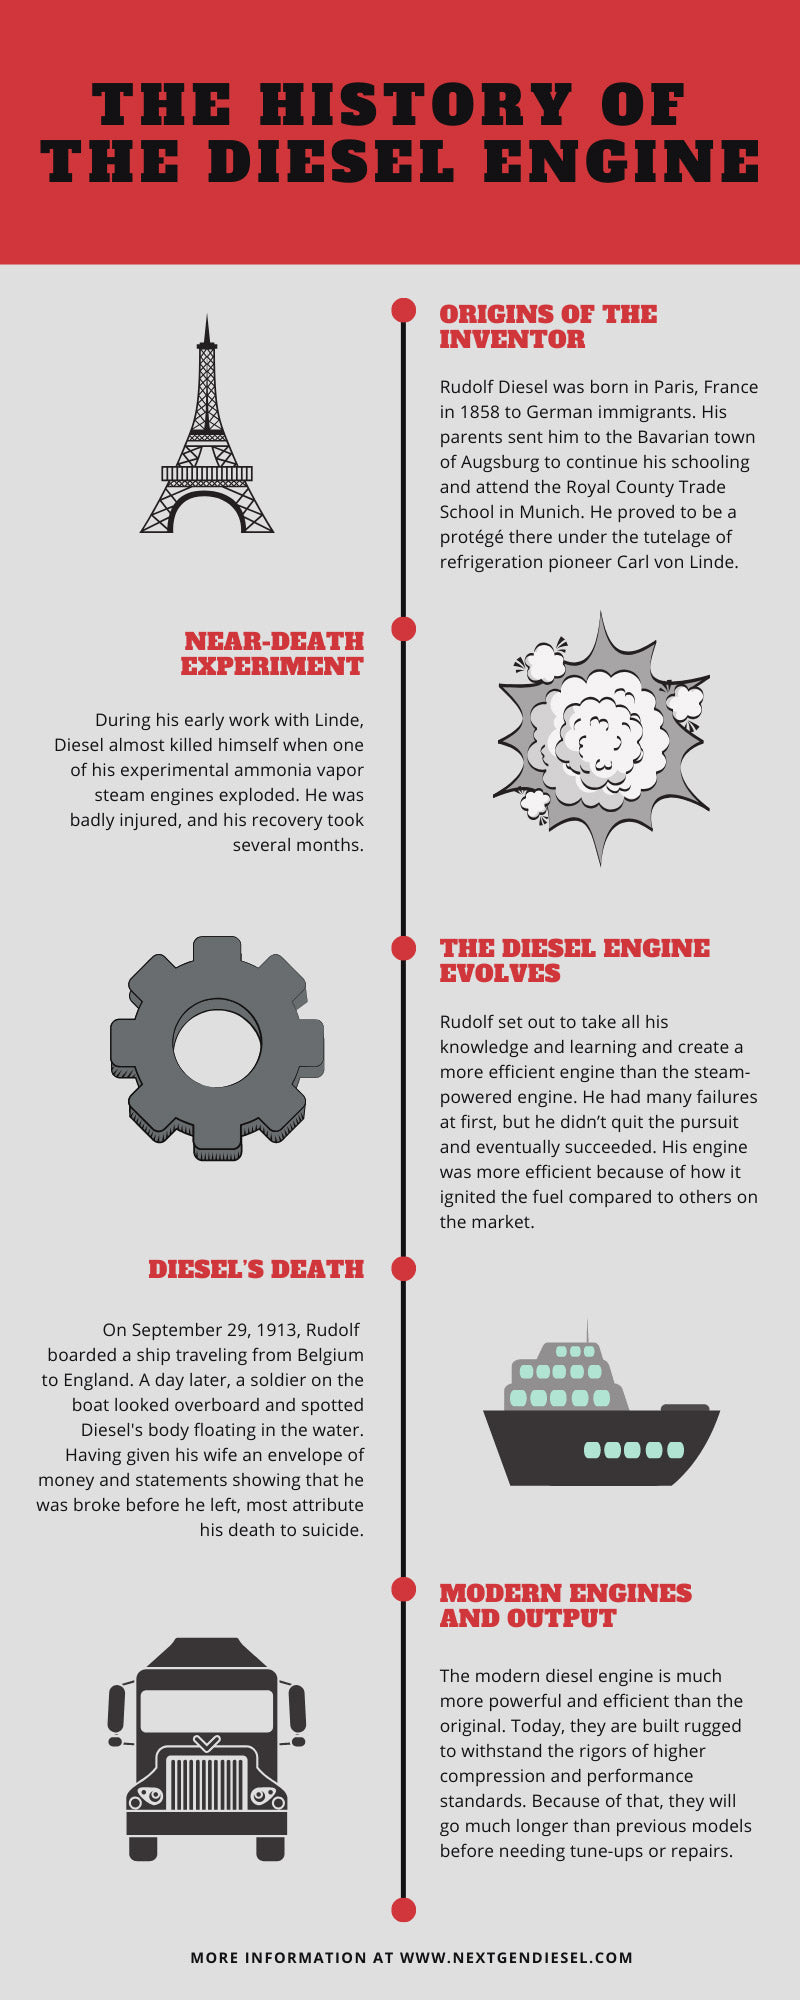 The History of the Diesel Engine infographic